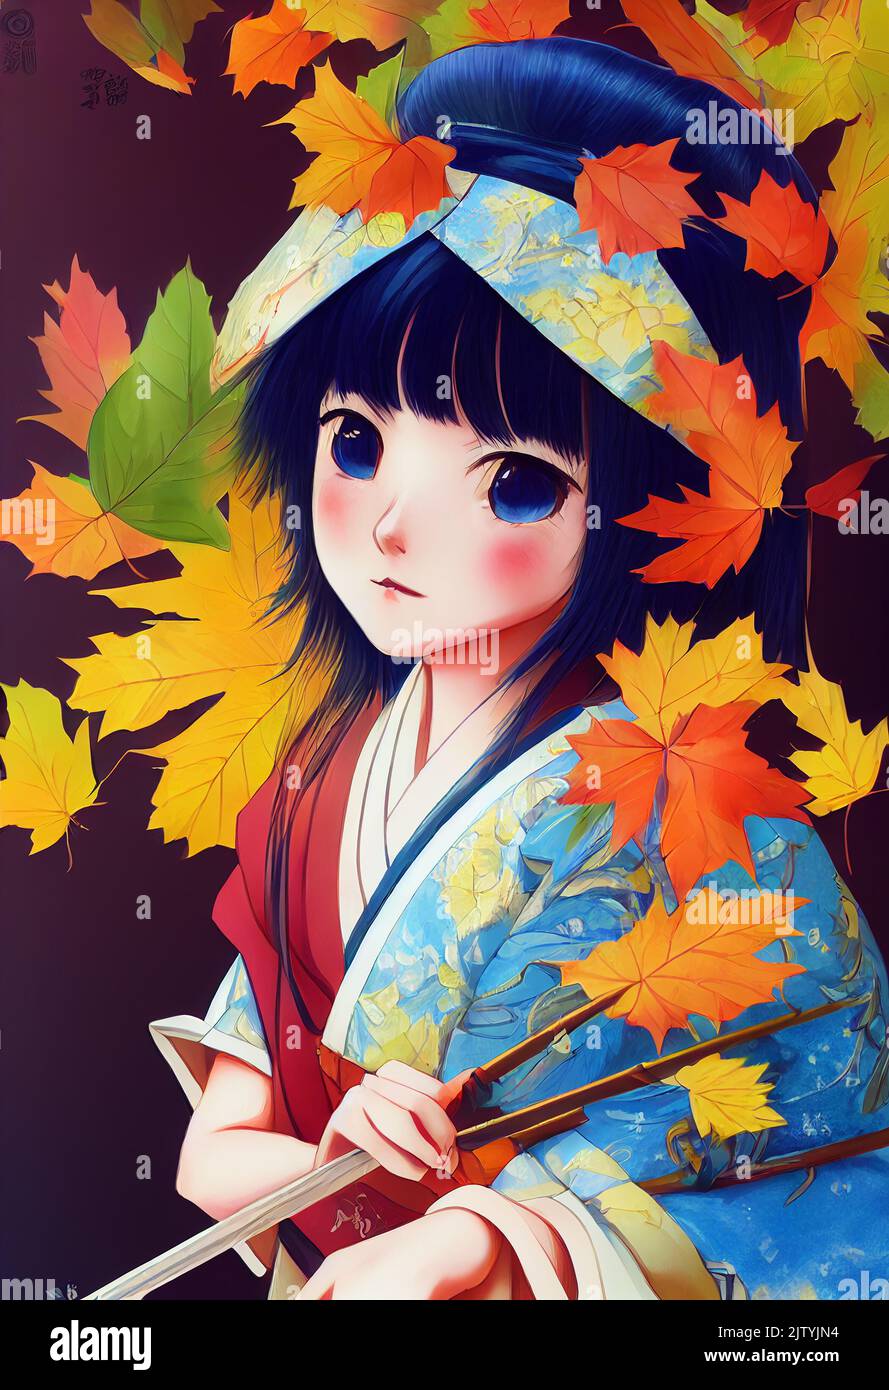 A cute girl staring at you Anime-style... - Stock Illustration [97211393] -  PIXTA